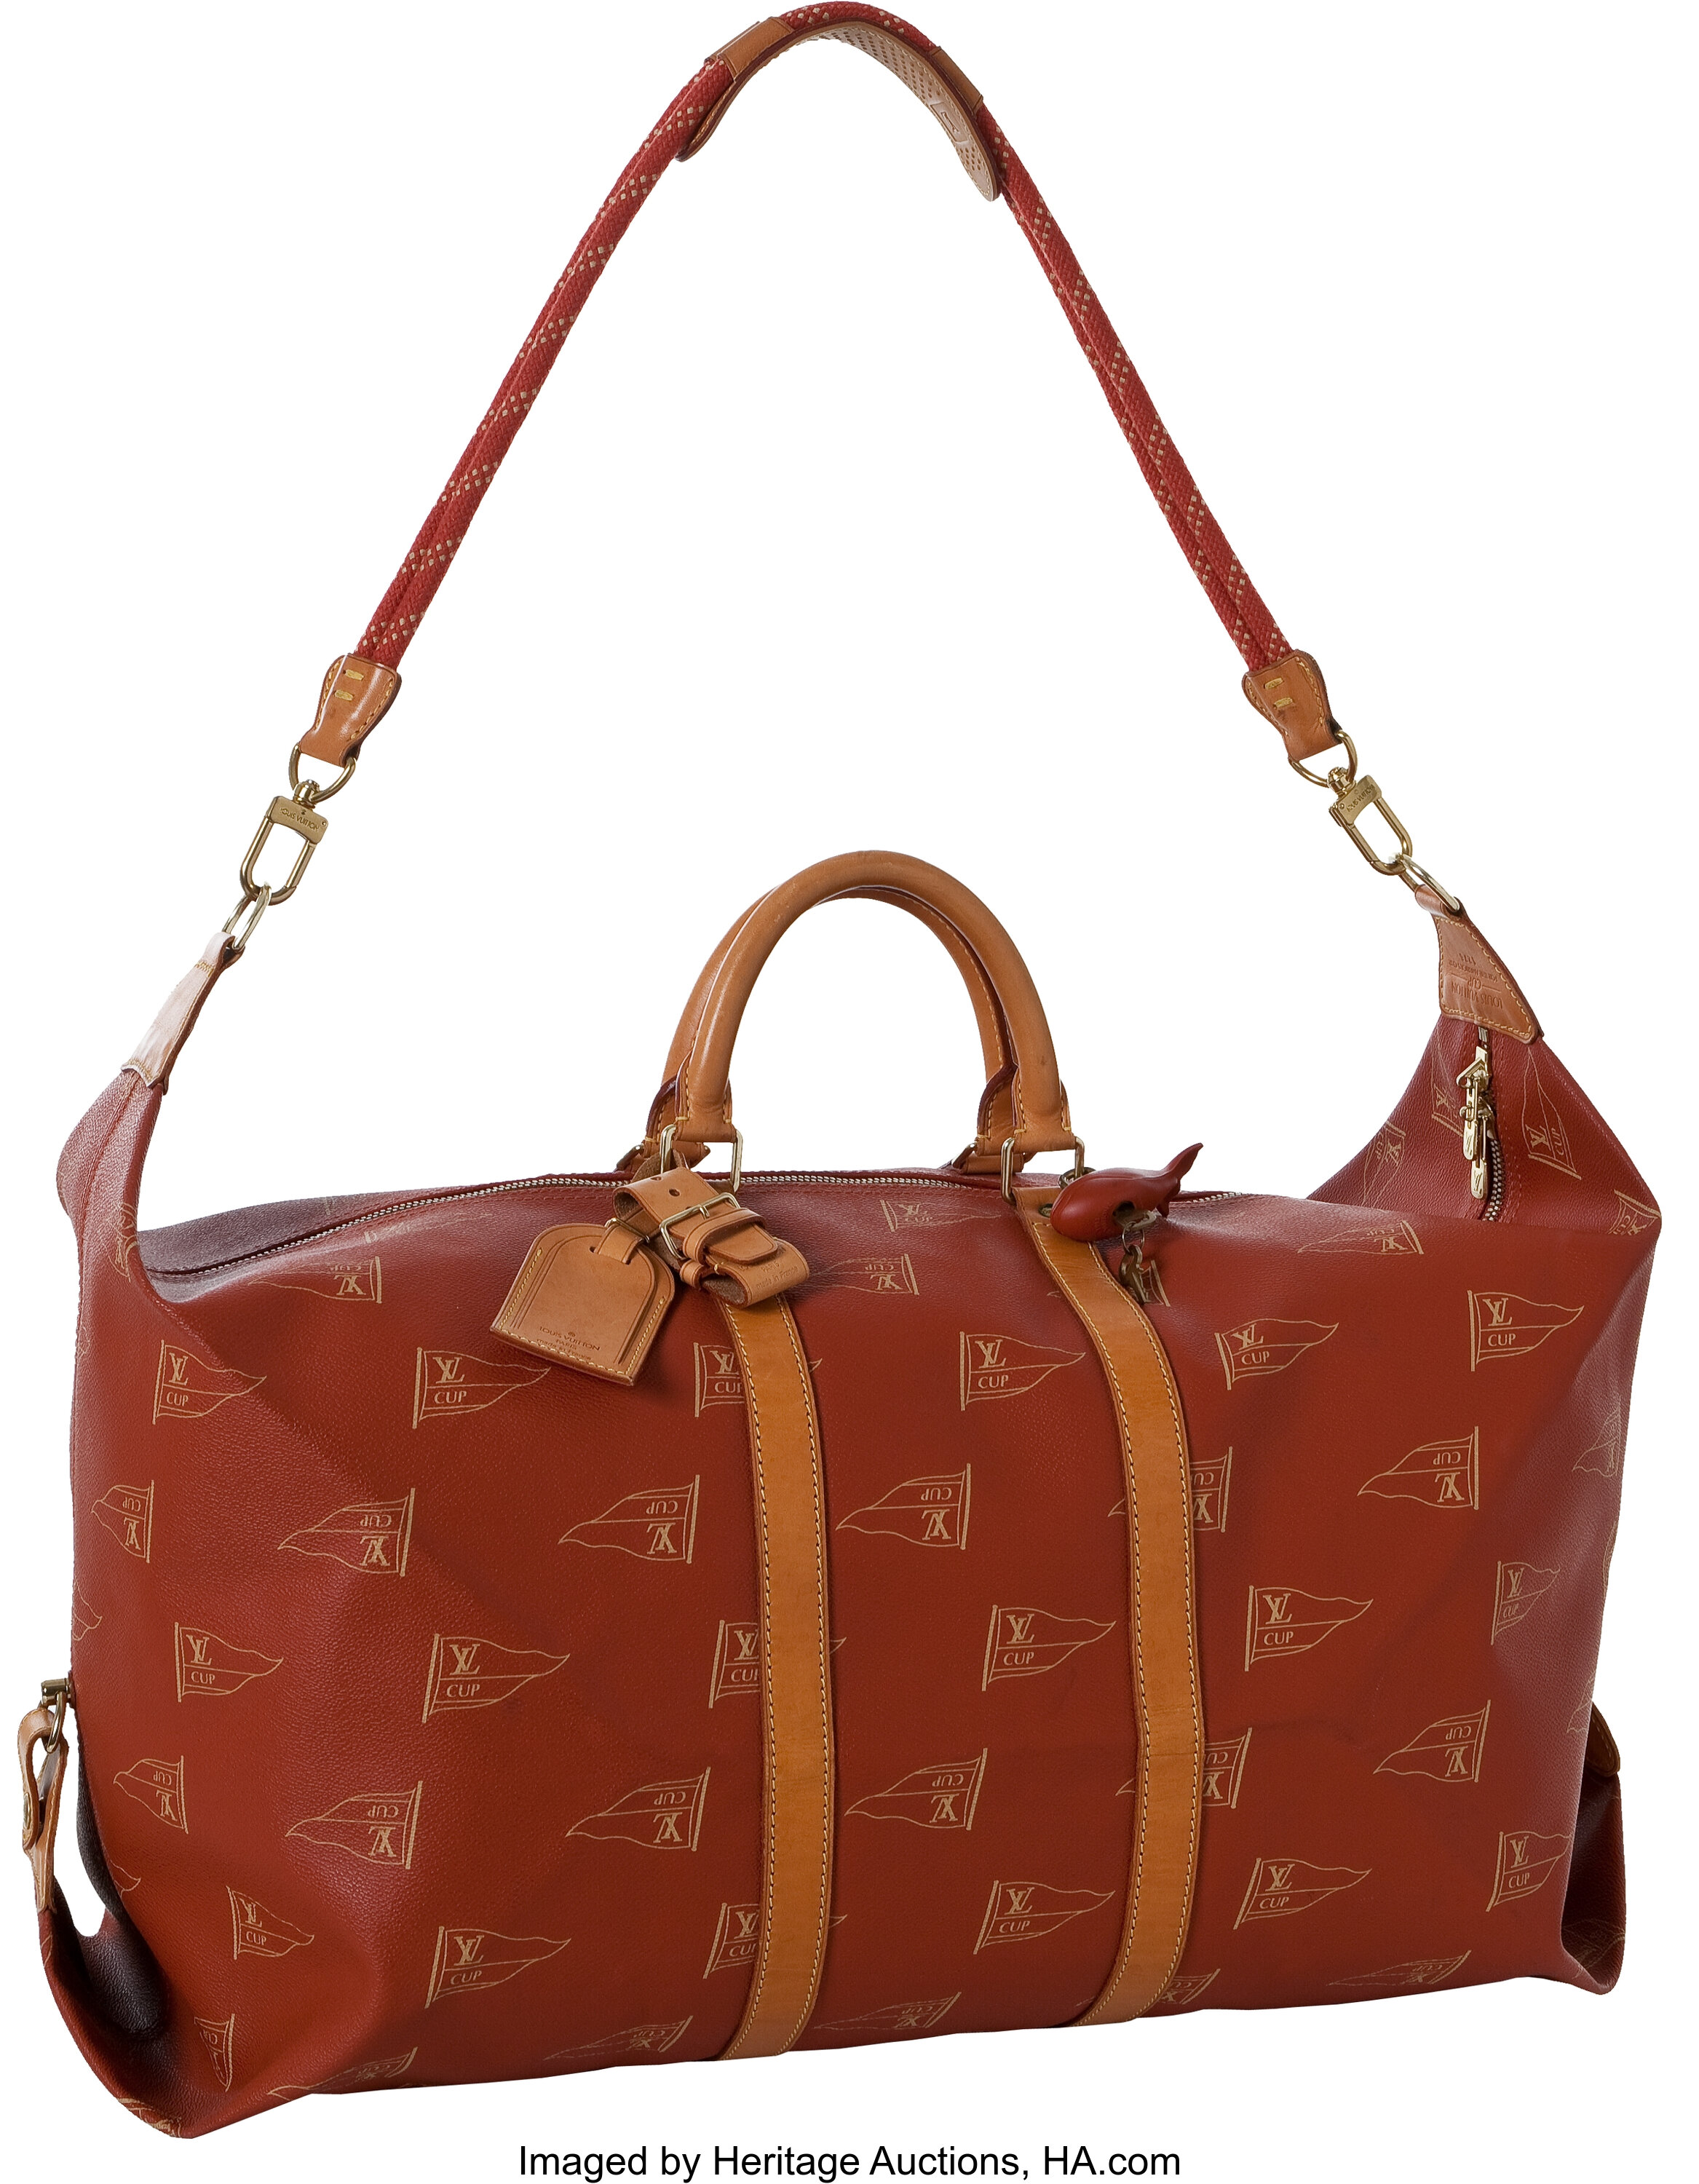 Louis Vuitton America's Cup Duffle Travel Overnight Bag LV-1118P